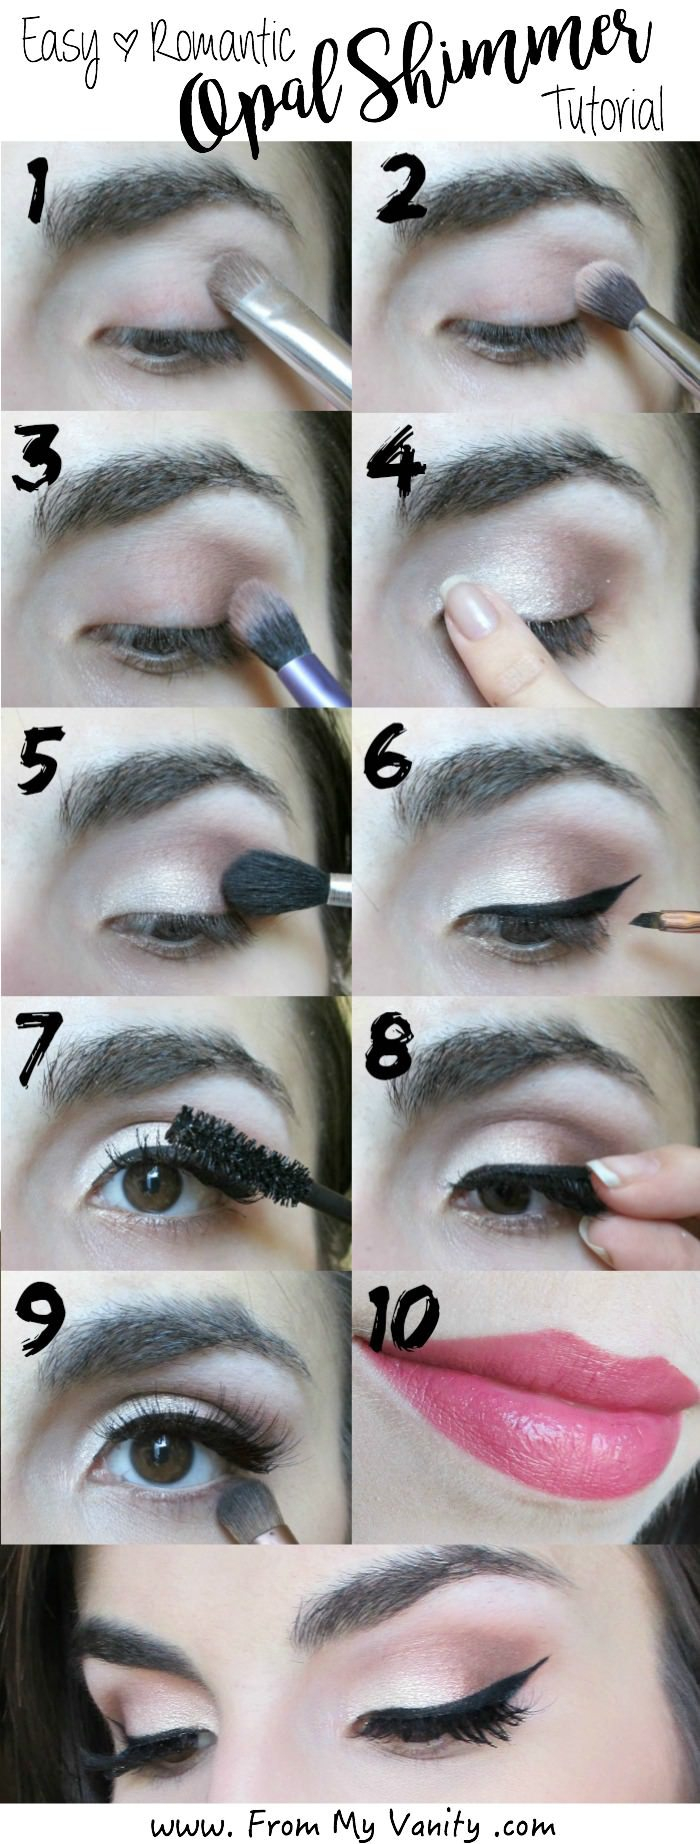 Eye Makeup For Prom 25 Prom Makeup Ideas Step Step Makeup Tutorials 2018 Styles